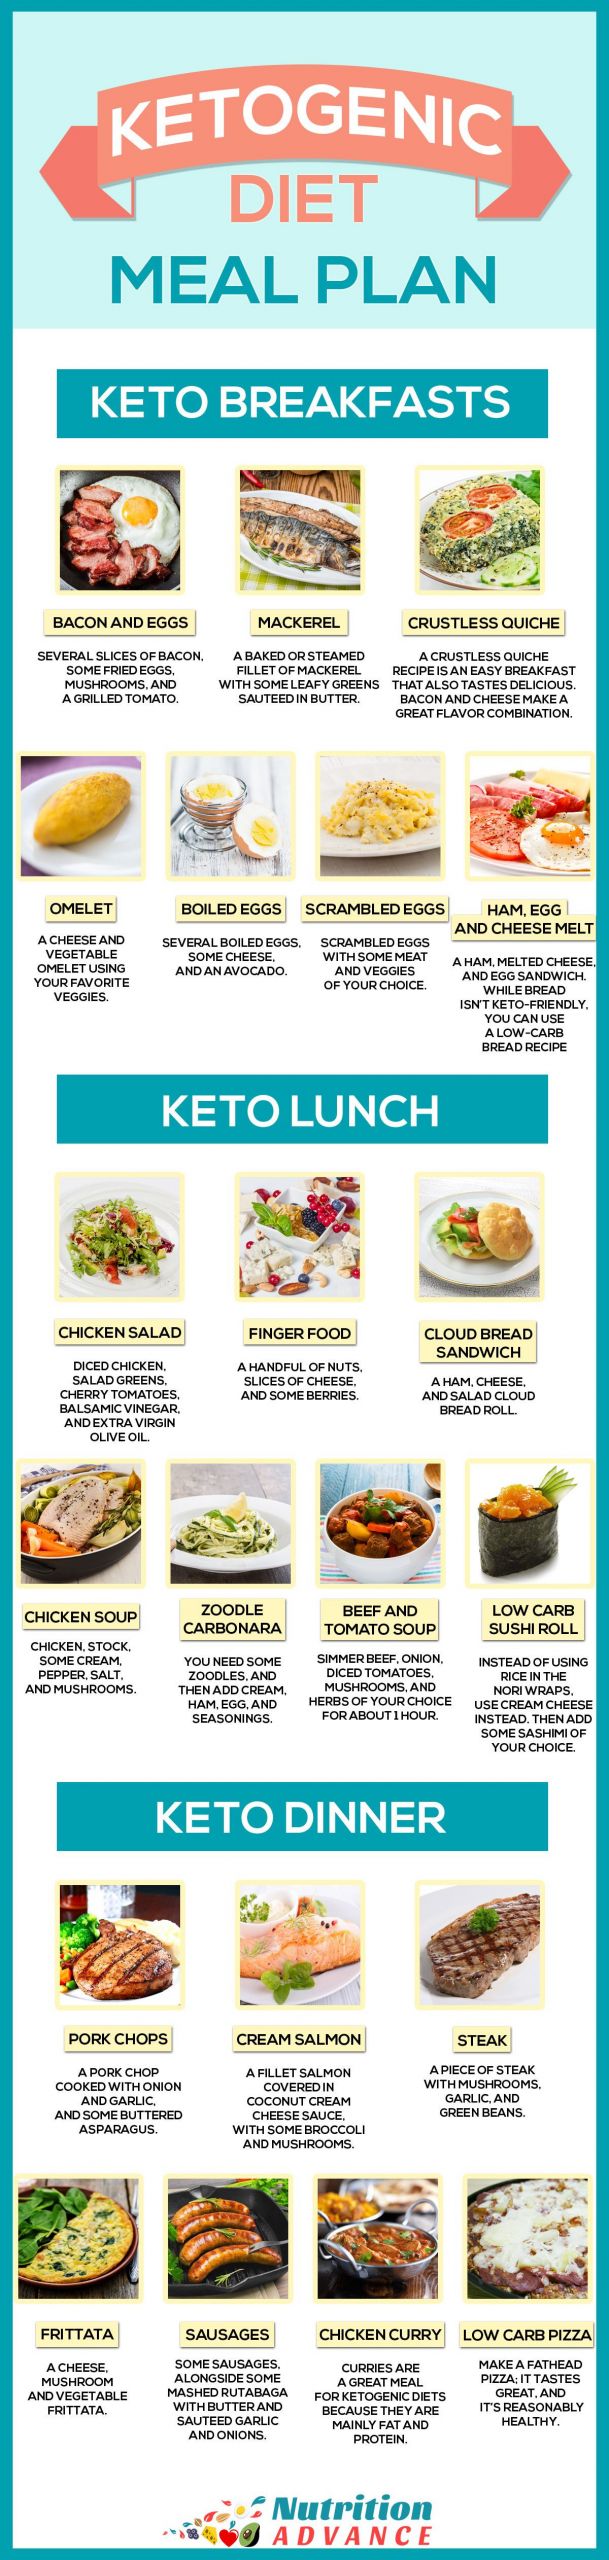 Keto Diet Plan For Men
 The Ketogenic Diet An Ultimate Guide to Keto